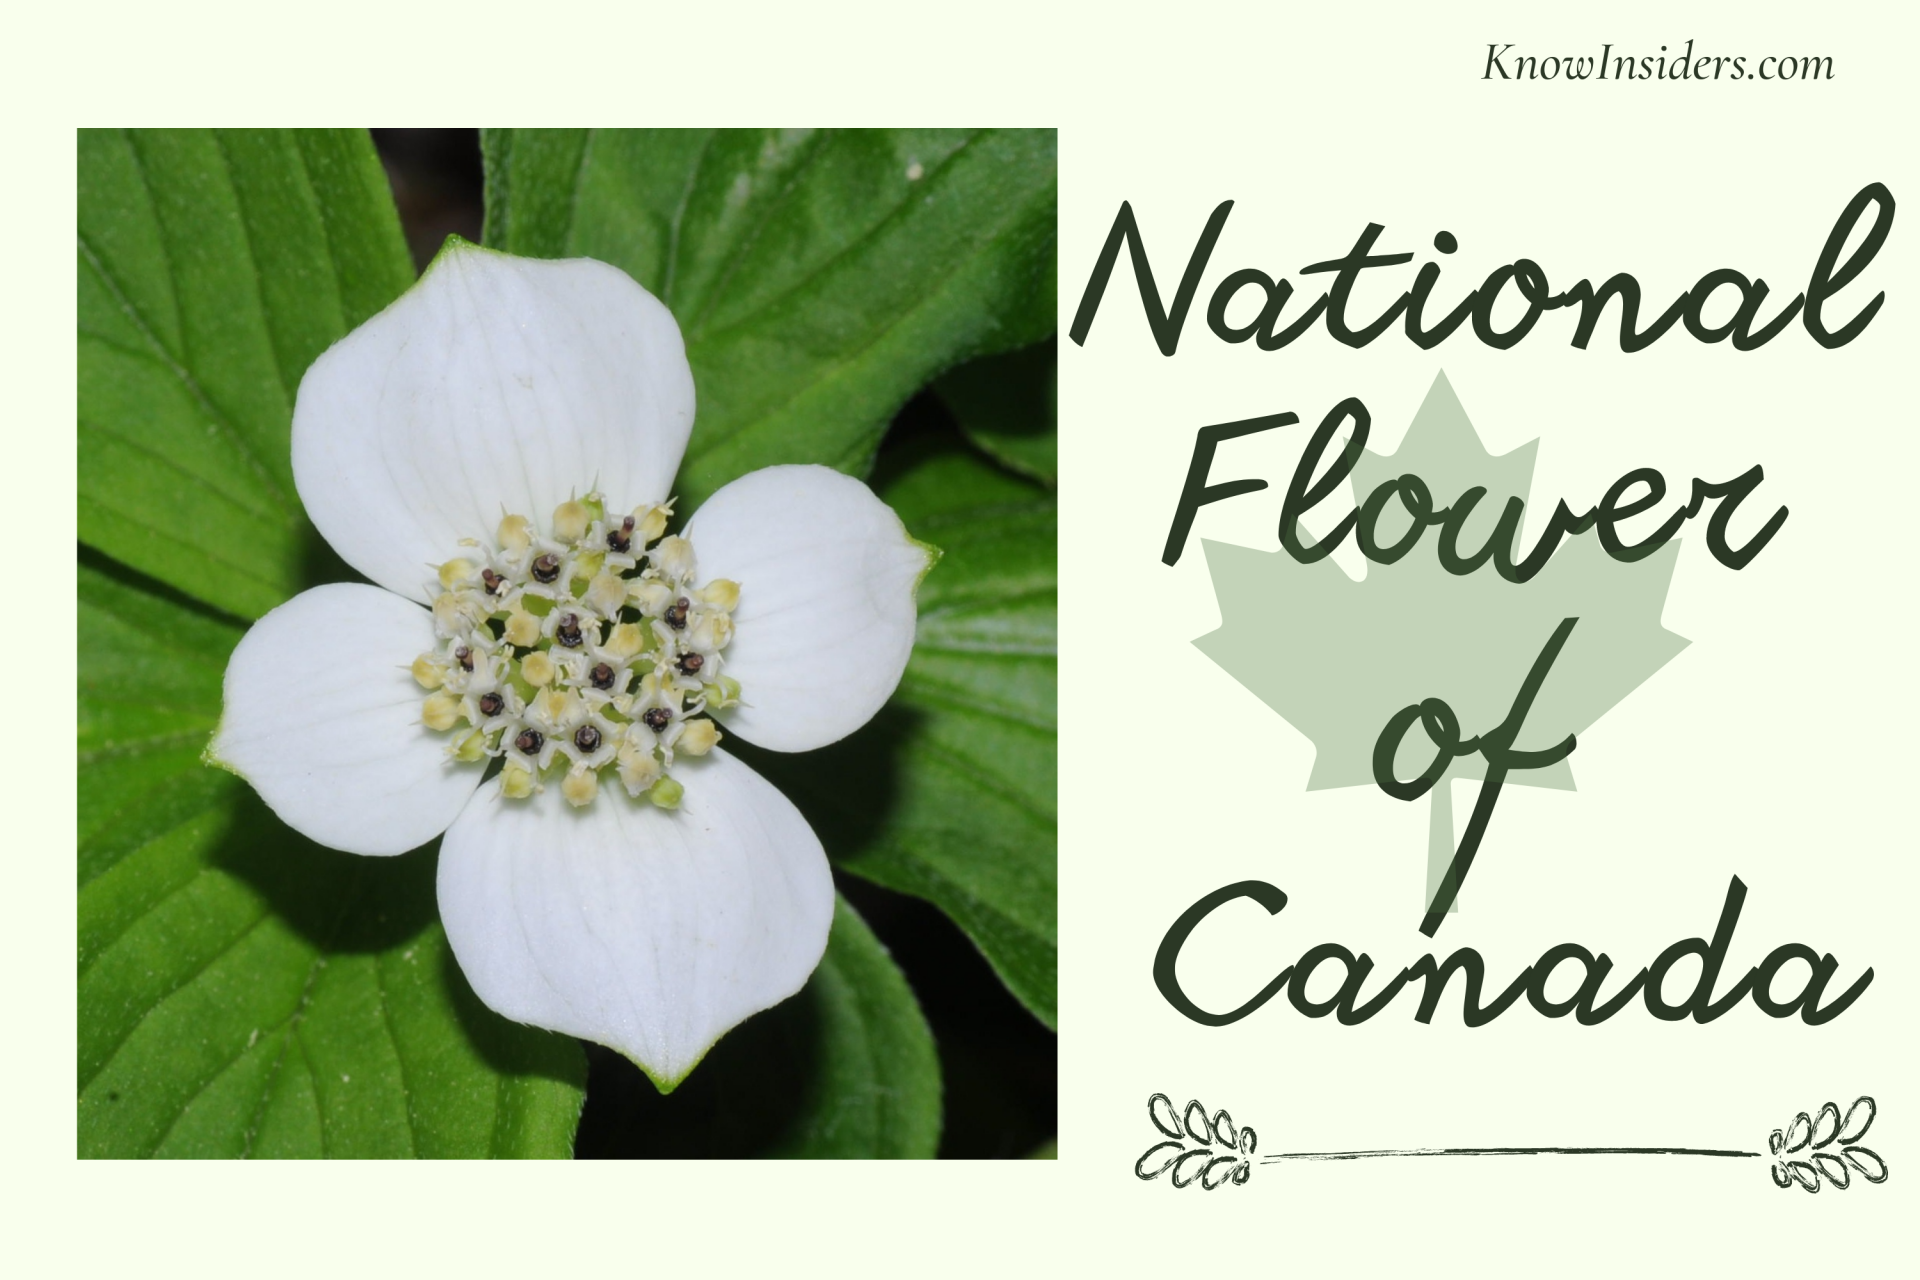 What Is The National Flower of Canada?